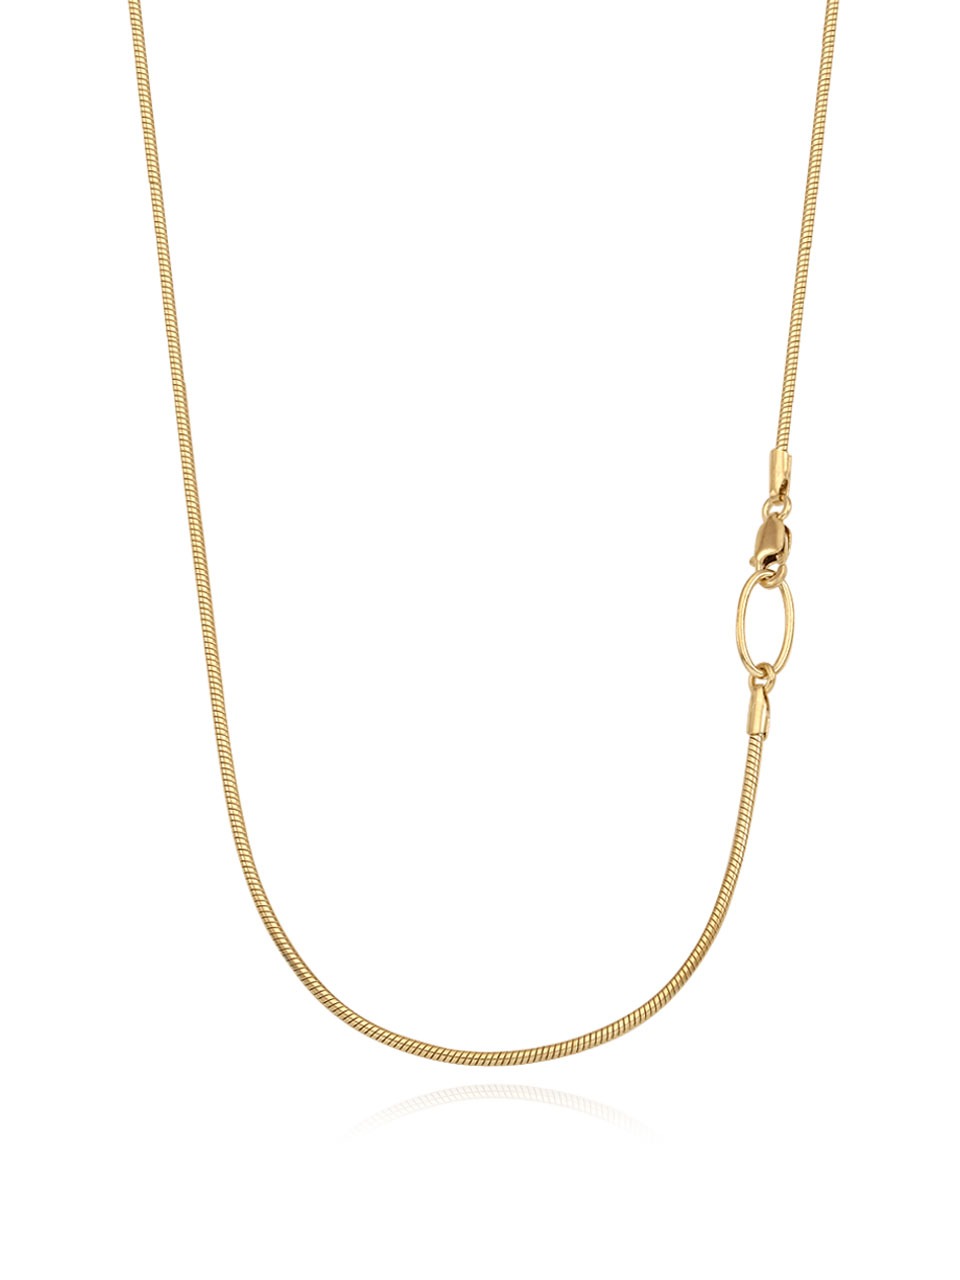 Silky Line Necklace (bold chain)